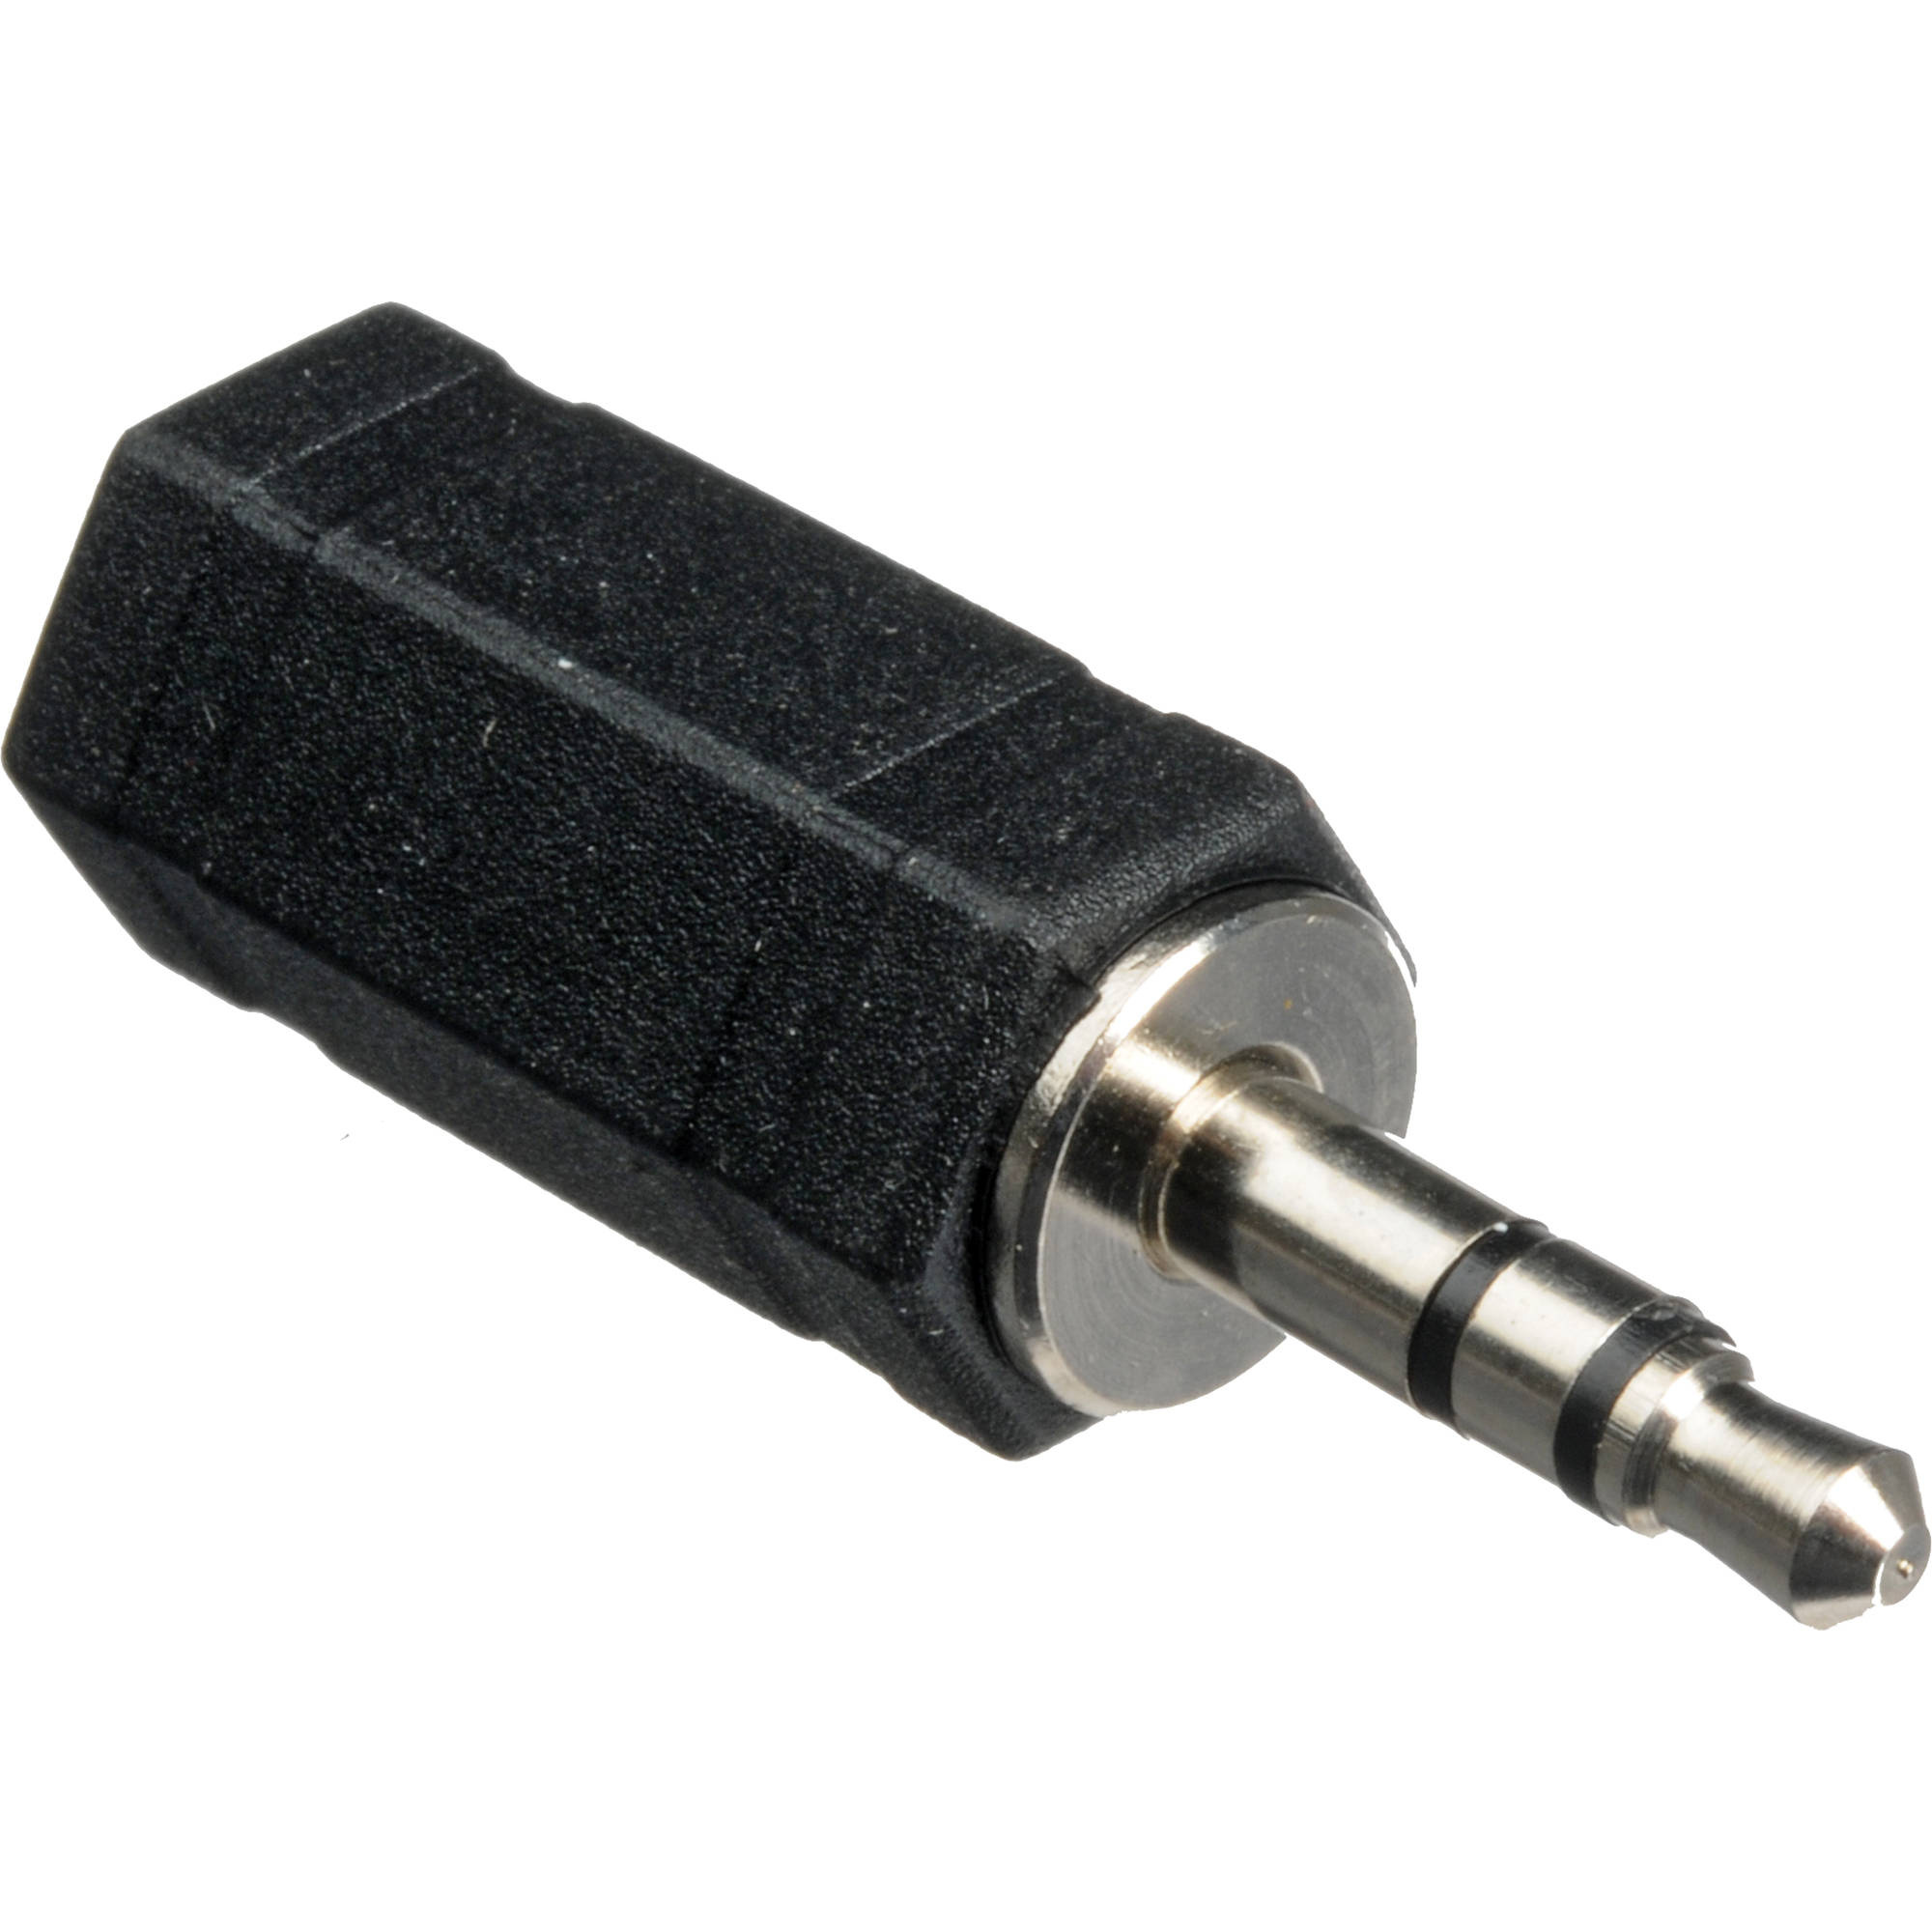 Hosa GMP-500 2.5mm to 3.5mm Adapter